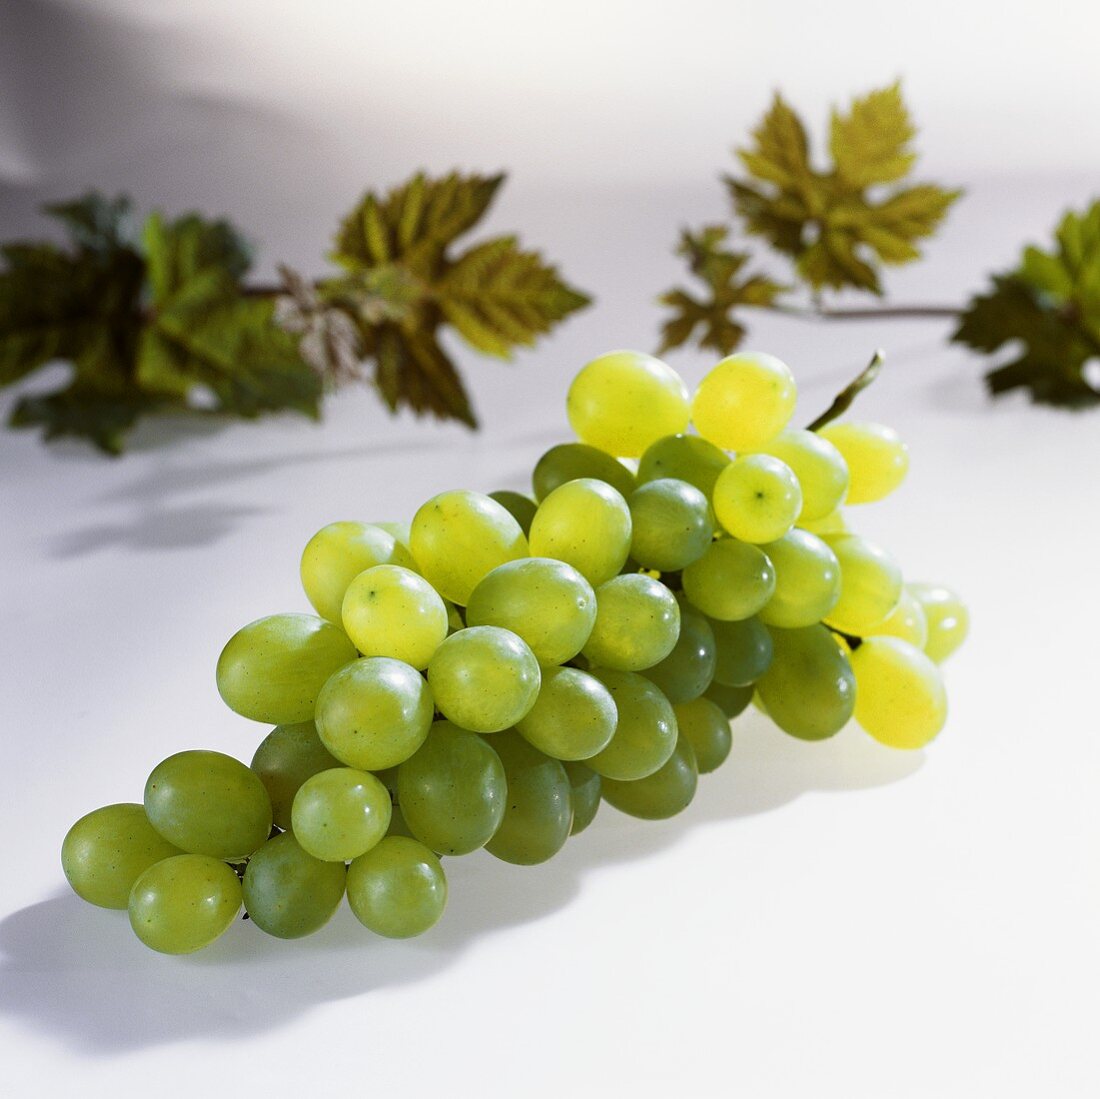 White grapes (variety: Victoria, Italy)